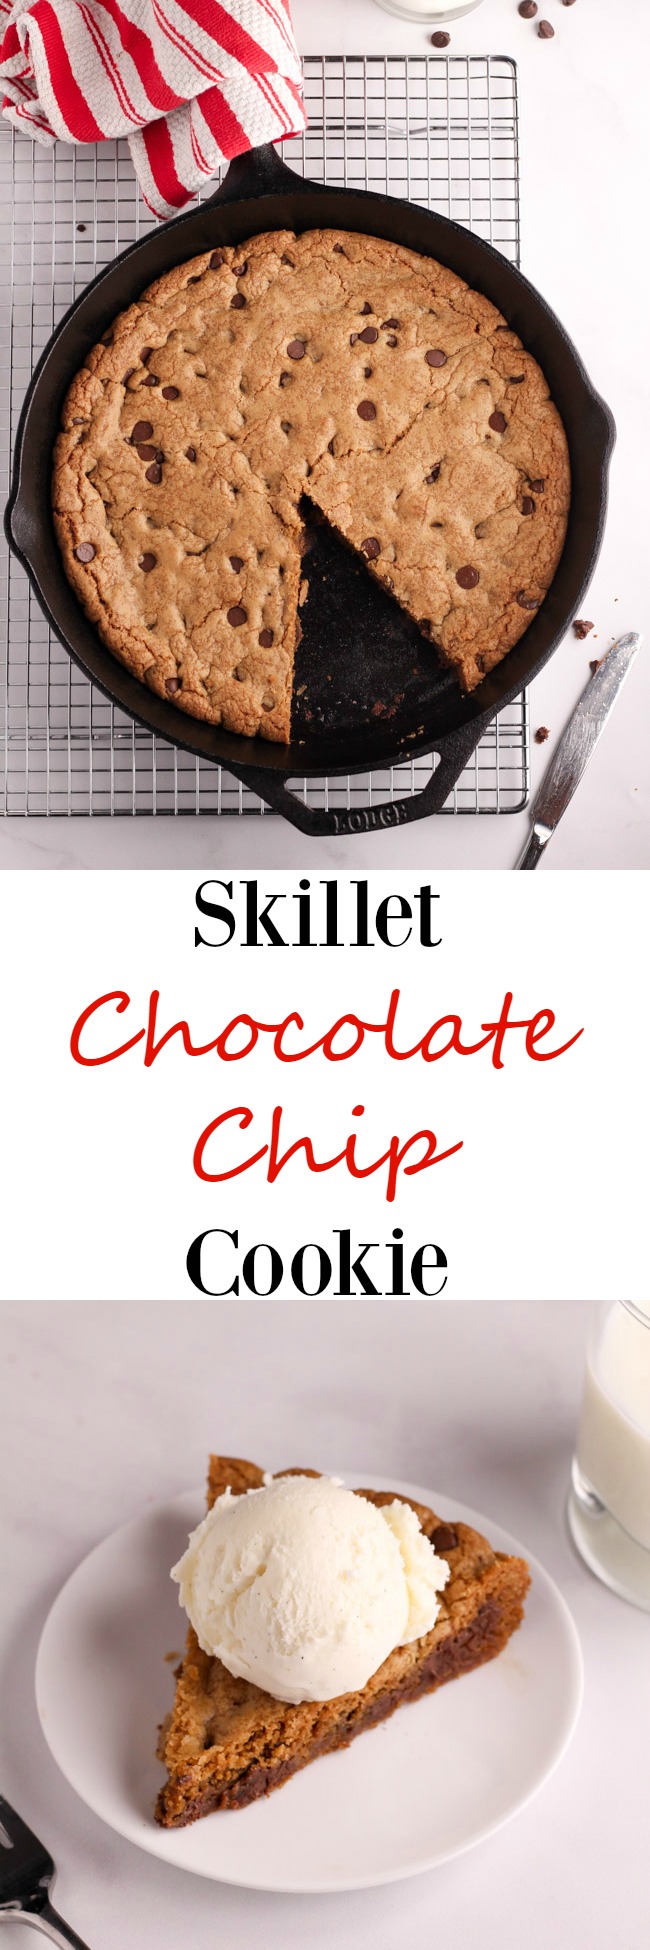 Skillet Chocolate Chip Cookie - Cooking is Messy